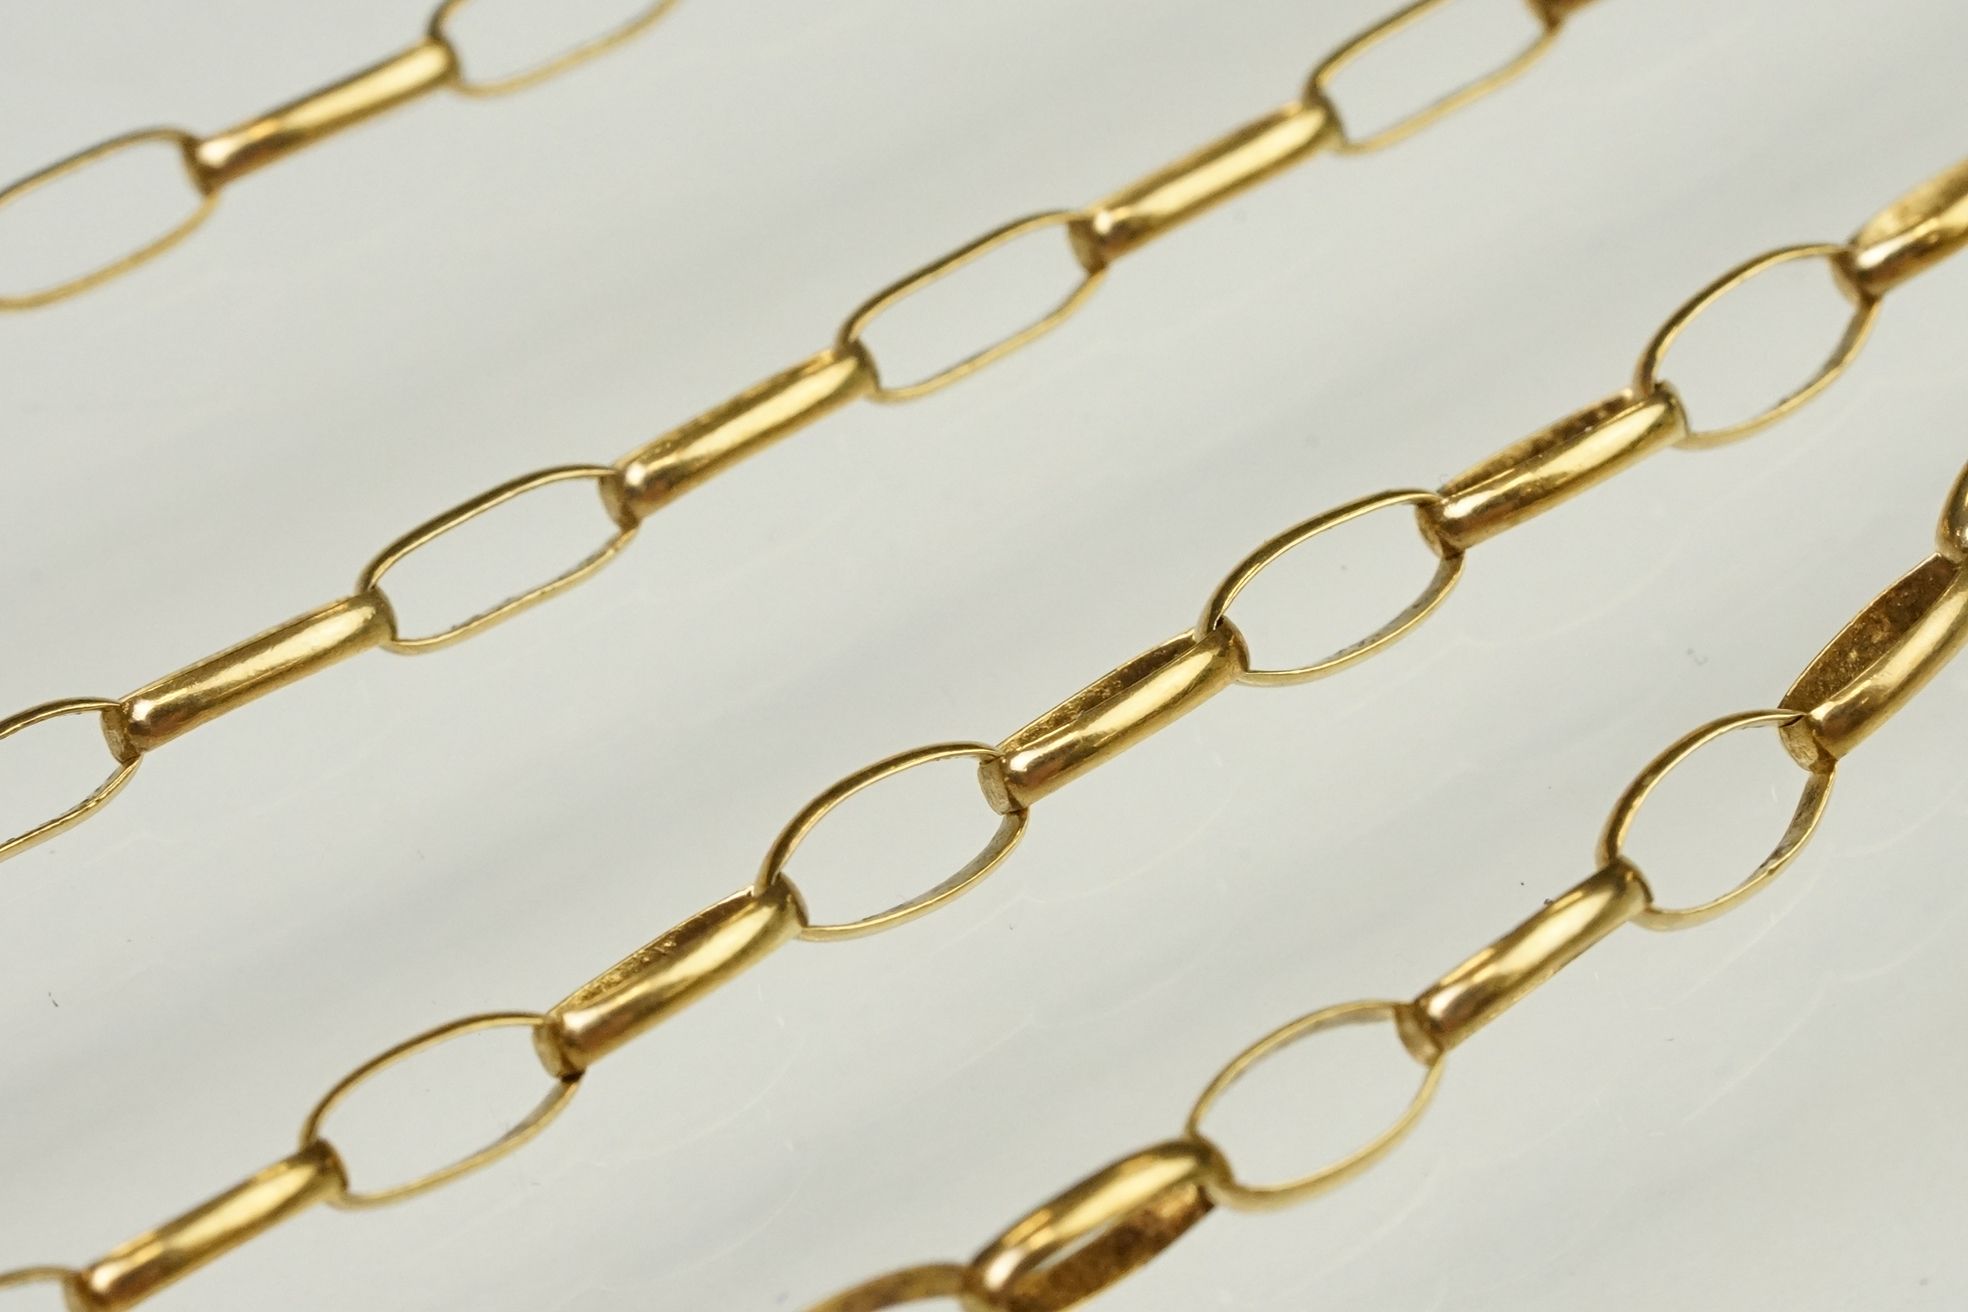 9ct gold oval link necklace chain with spring ring clasp. Marked 9k to clasp. Measures 80cm. - Image 2 of 5